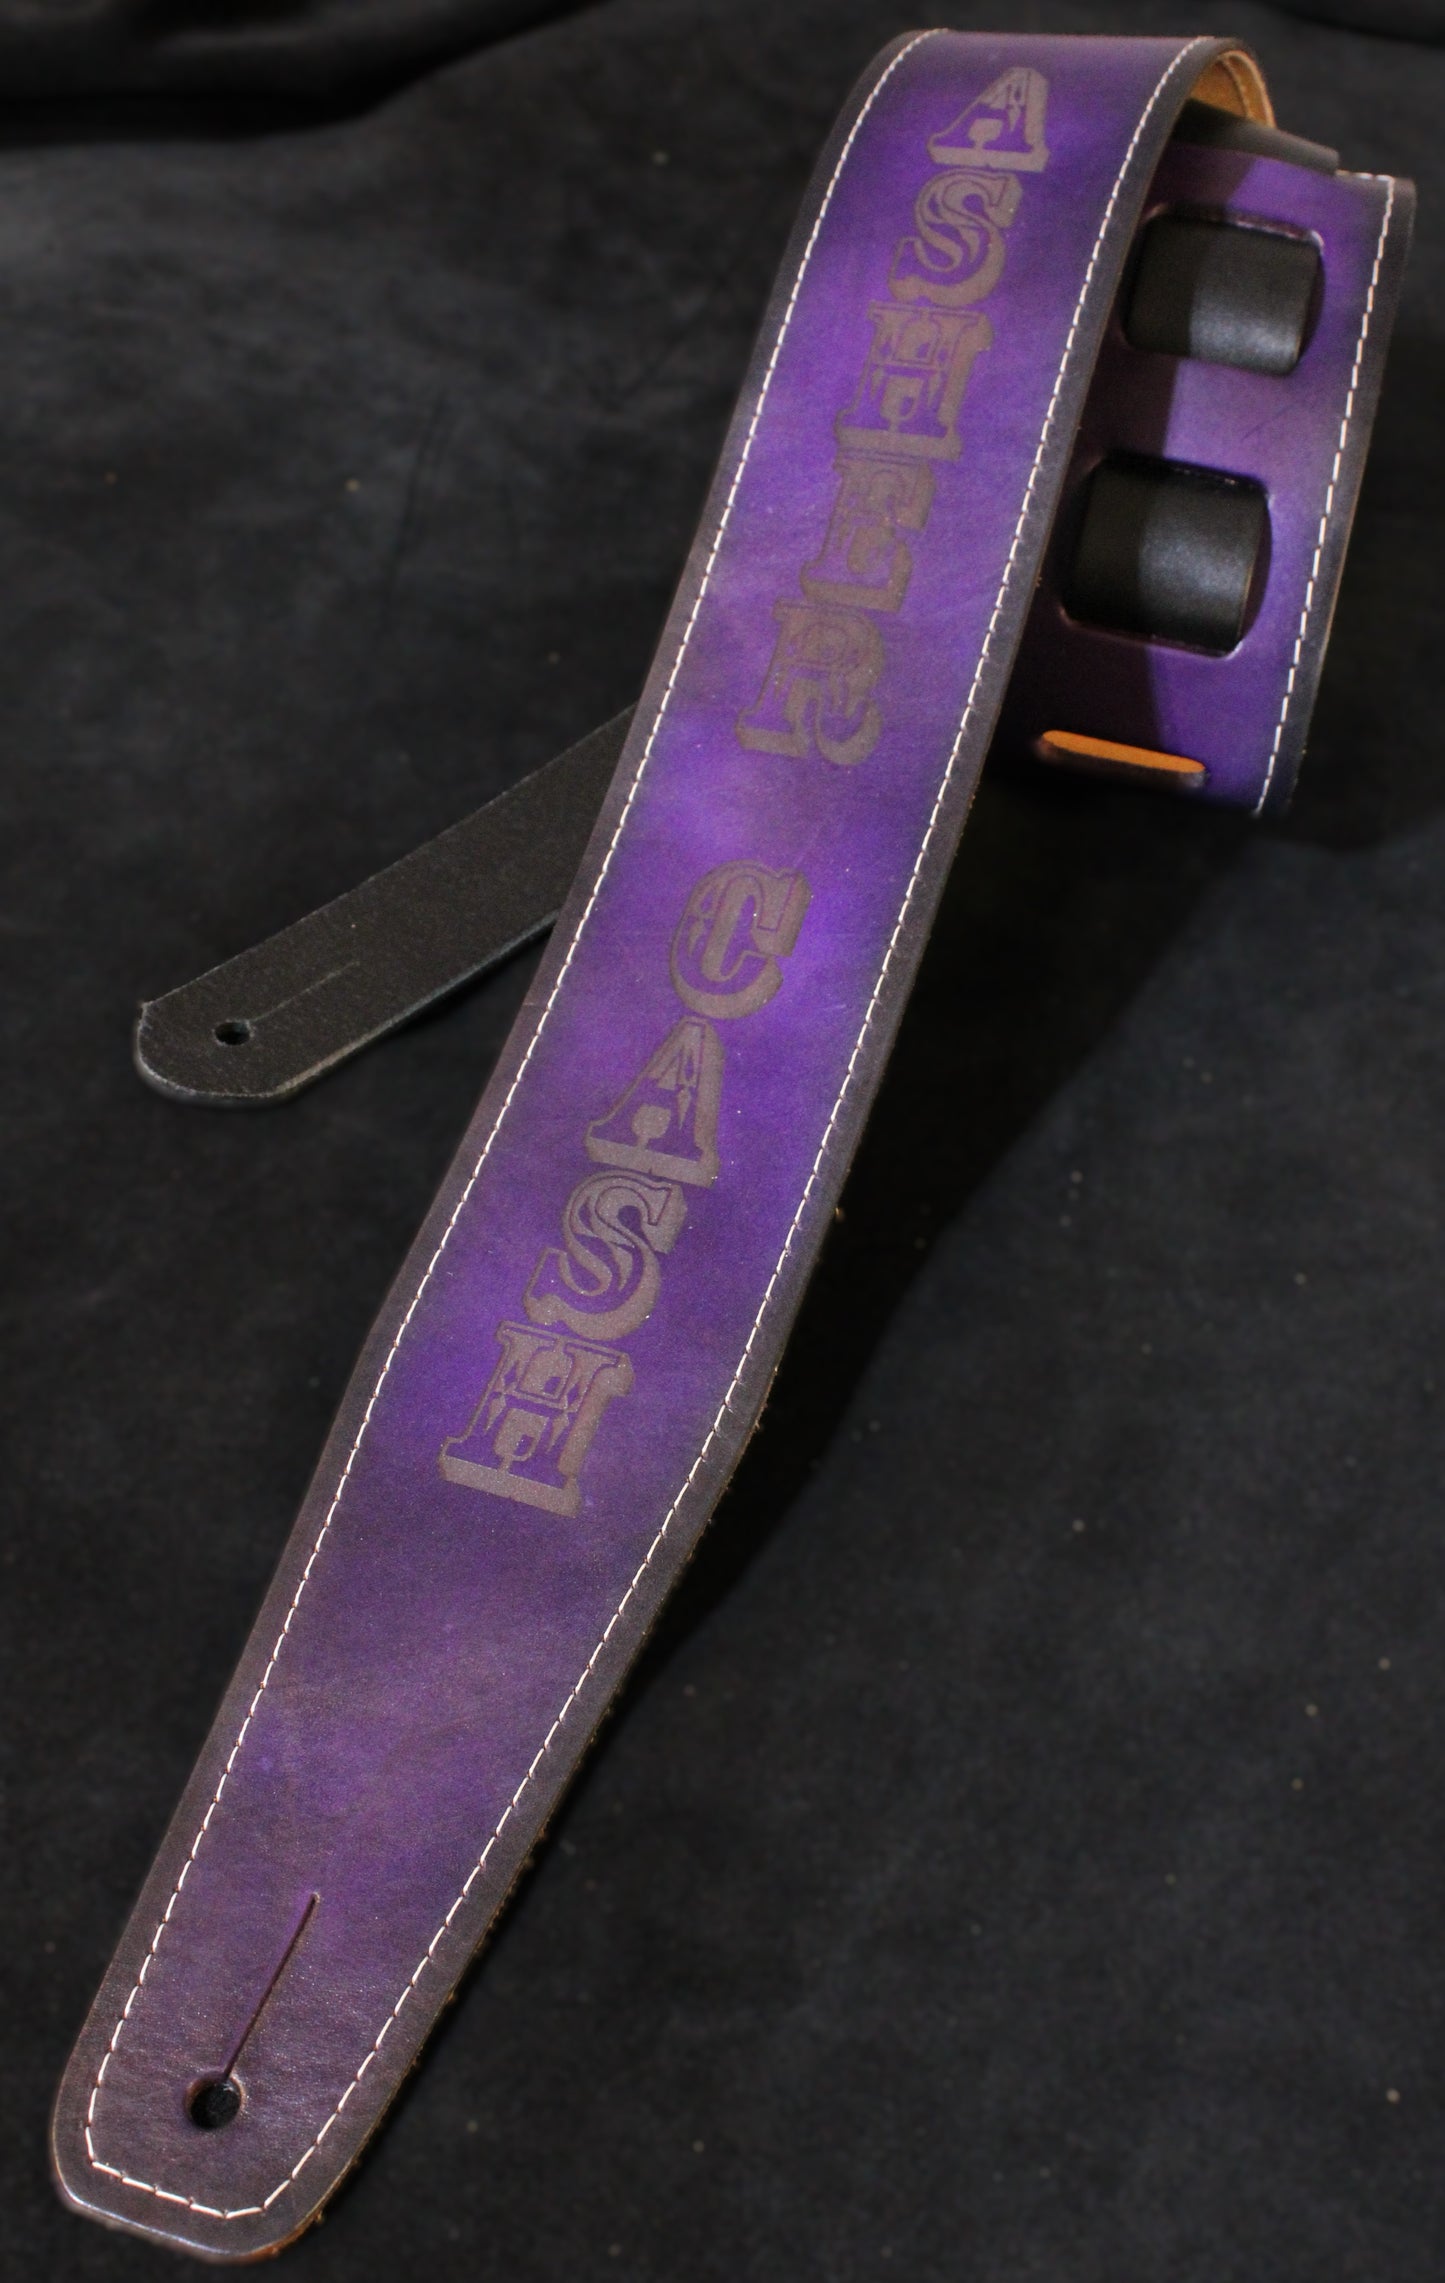 Stitched purple leather guitar strap